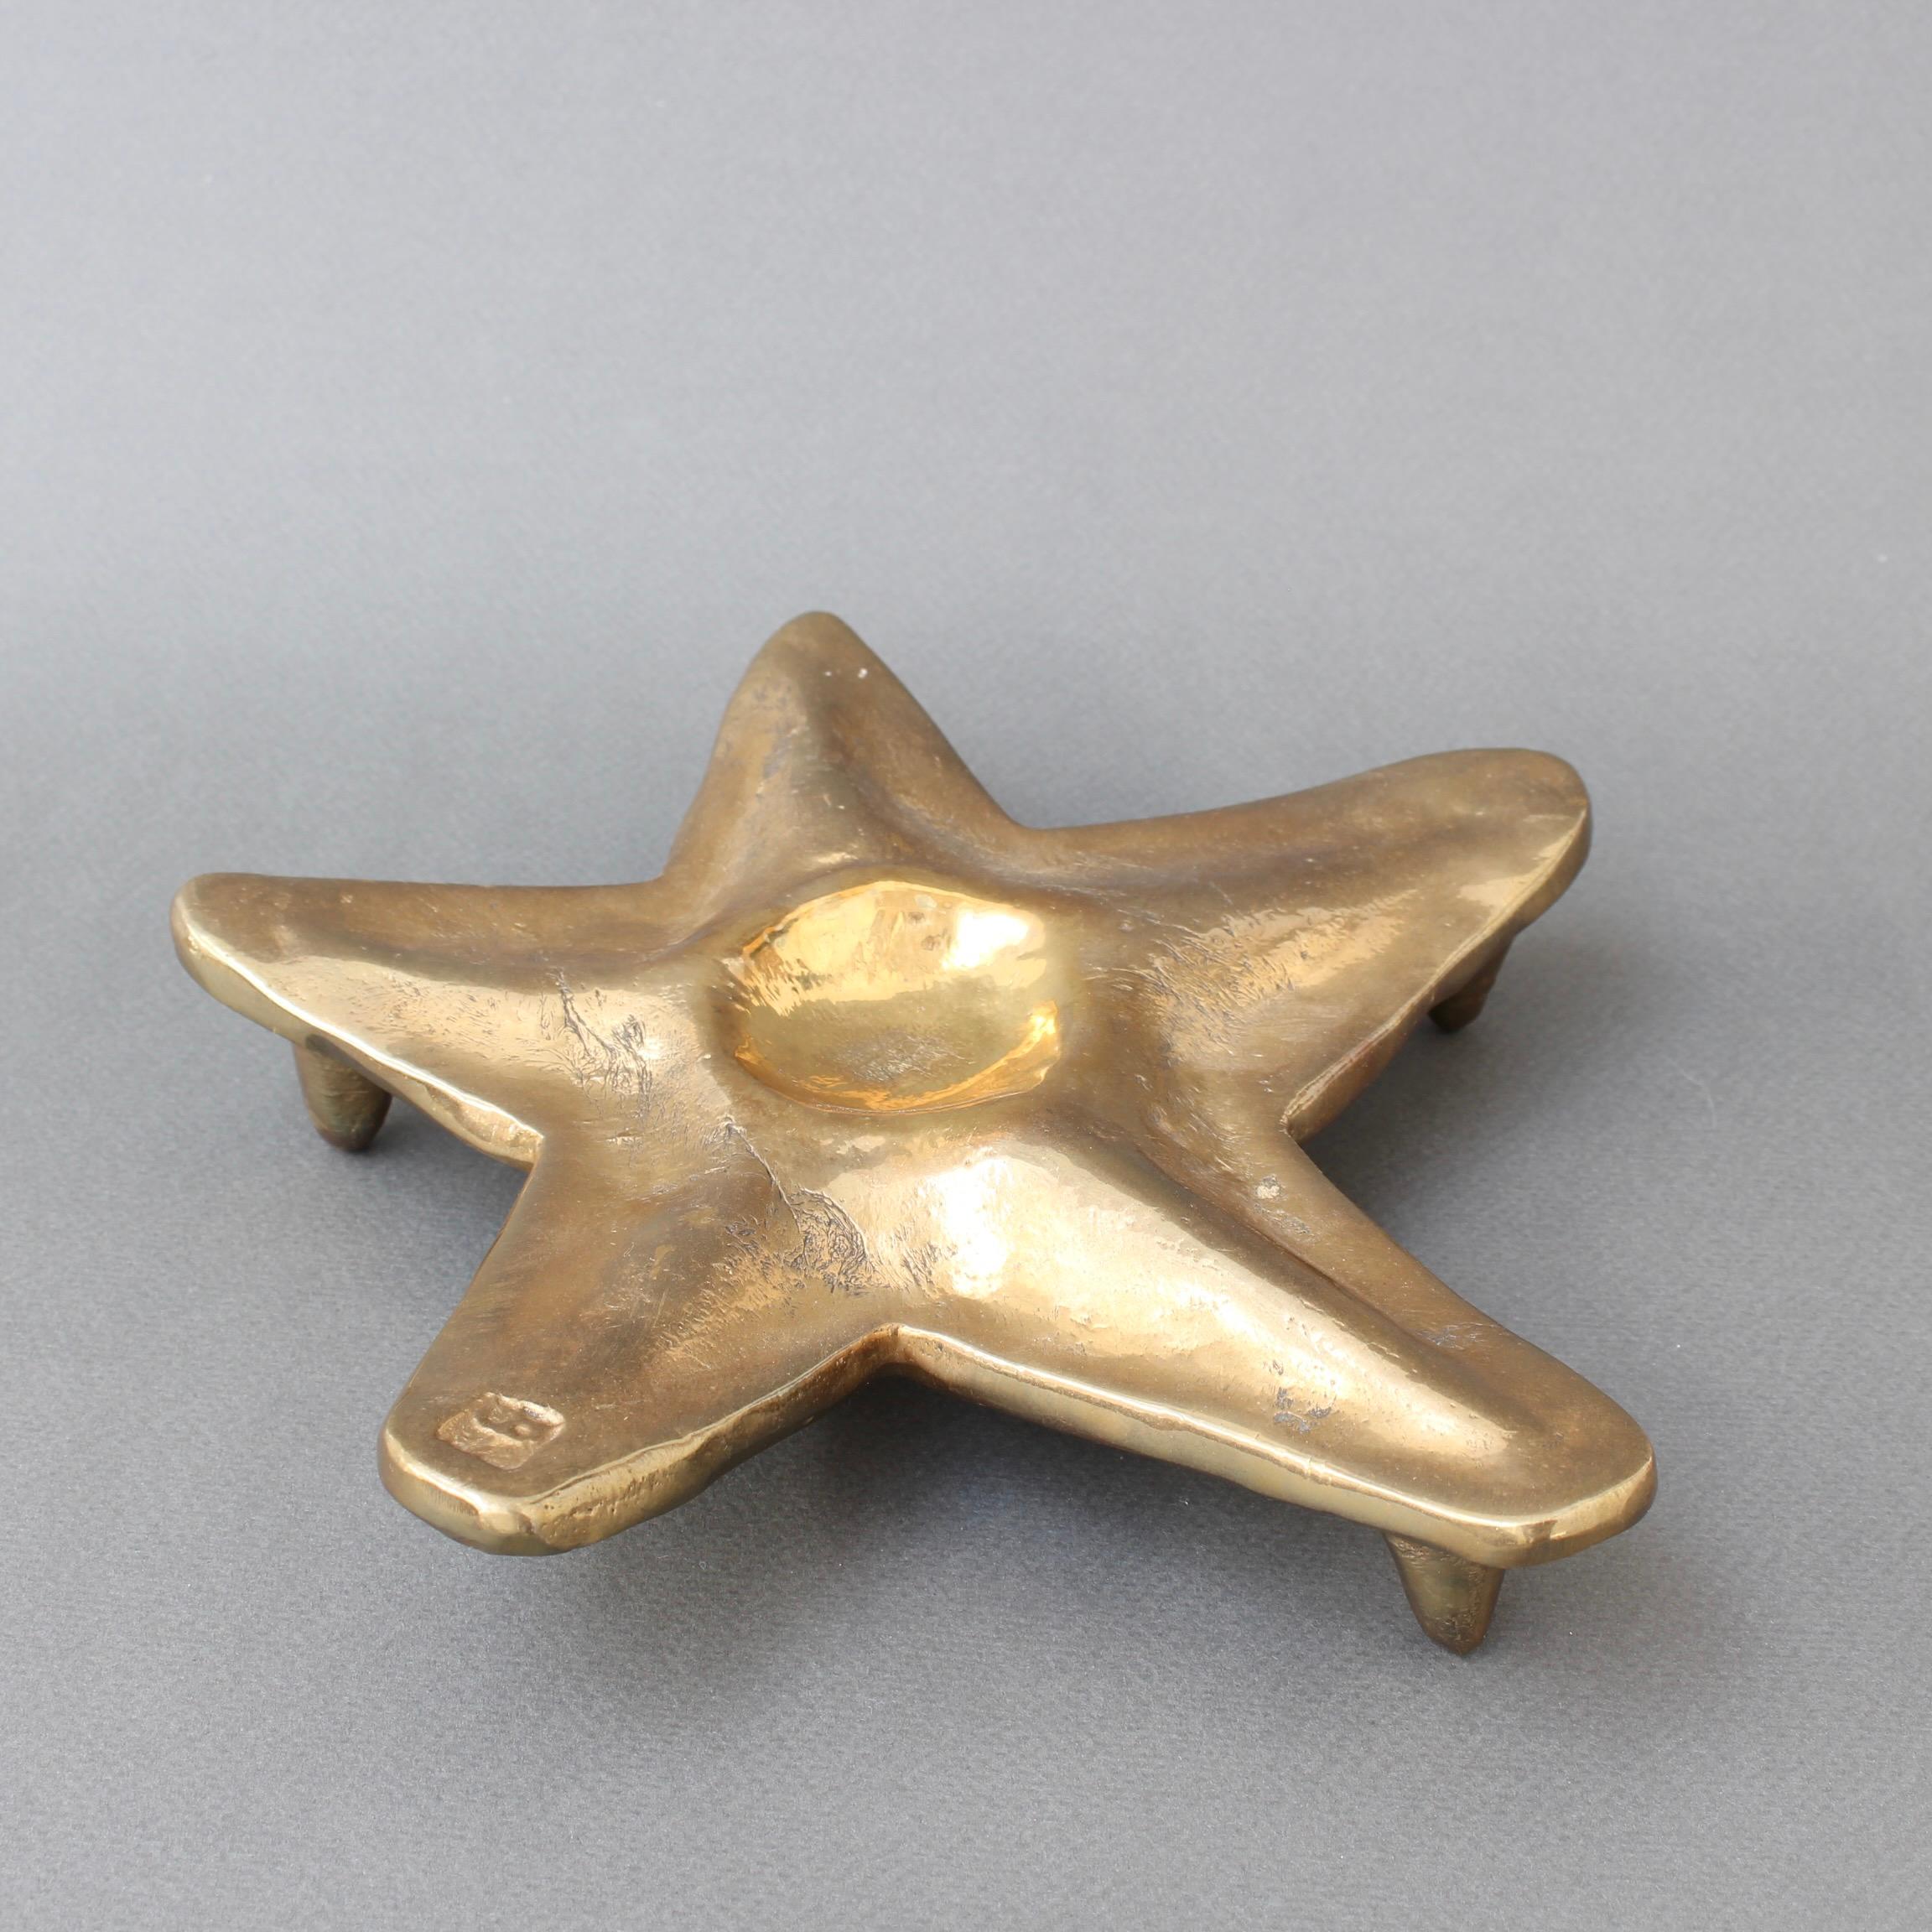 Brass trivet by David Marshall (circa 1990s). This piece is weighty, elegantly rugged, beautifully trodden and in the form of a starfish. It looks like it has had a rough life and therein lies its beauty. Raw, brutal and alluring. Maker's mark